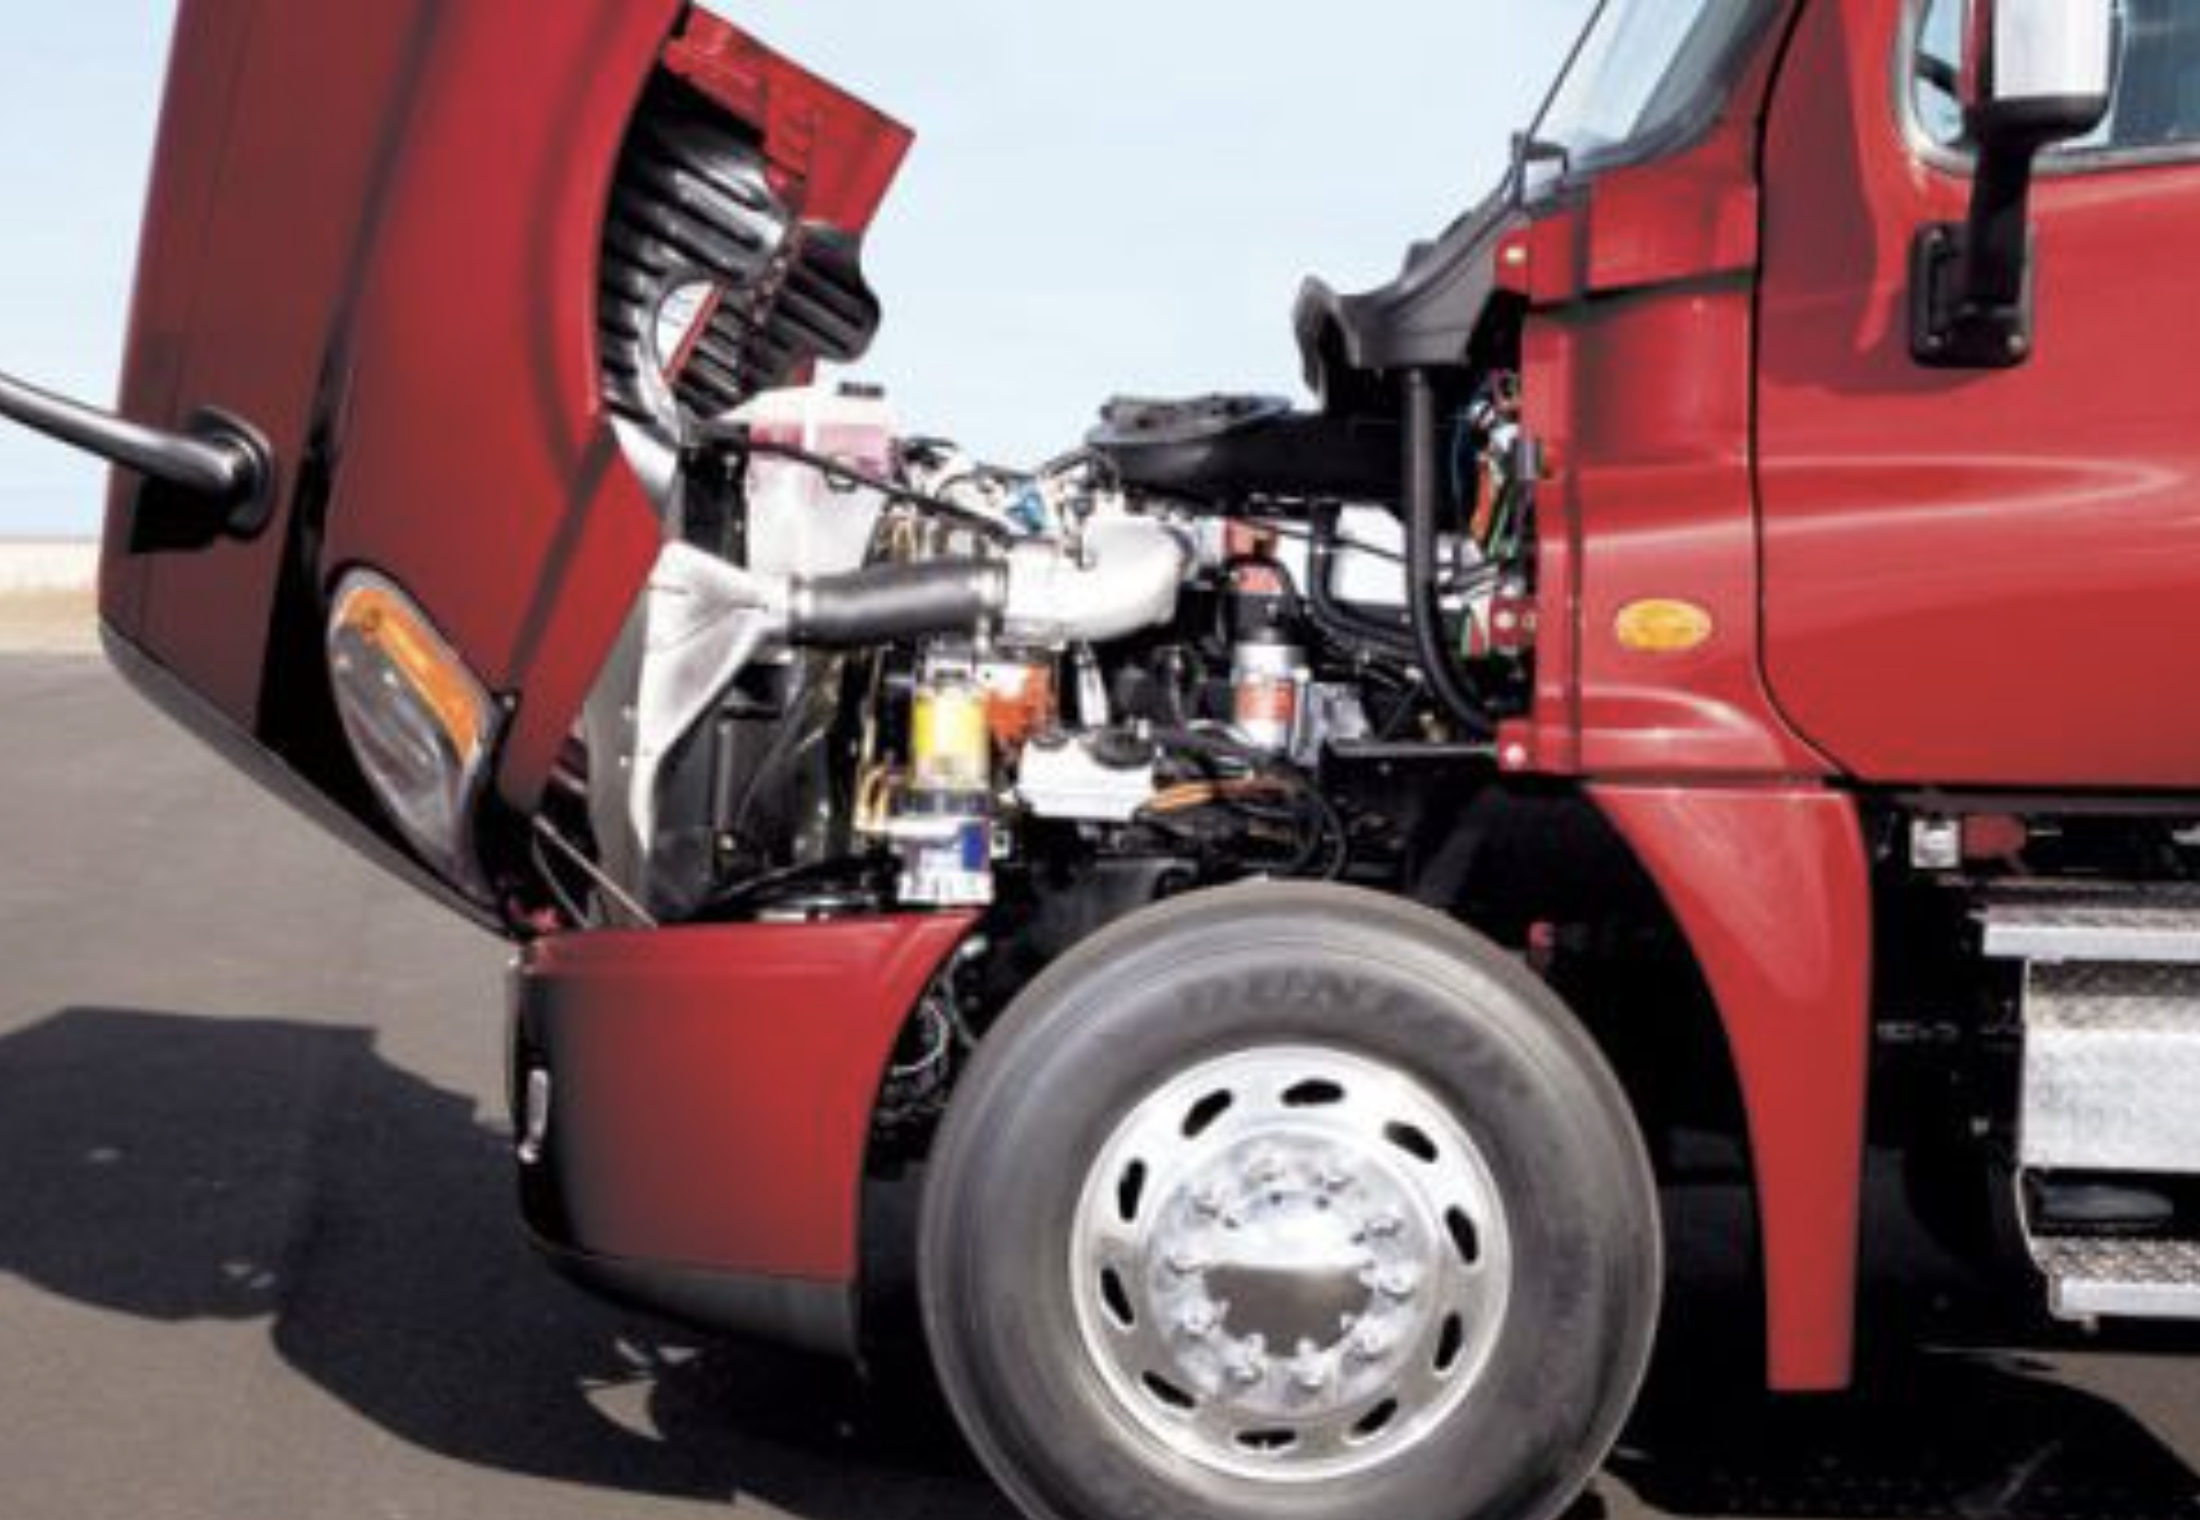 this image shows mobile truck repair services in Clifton, NJ